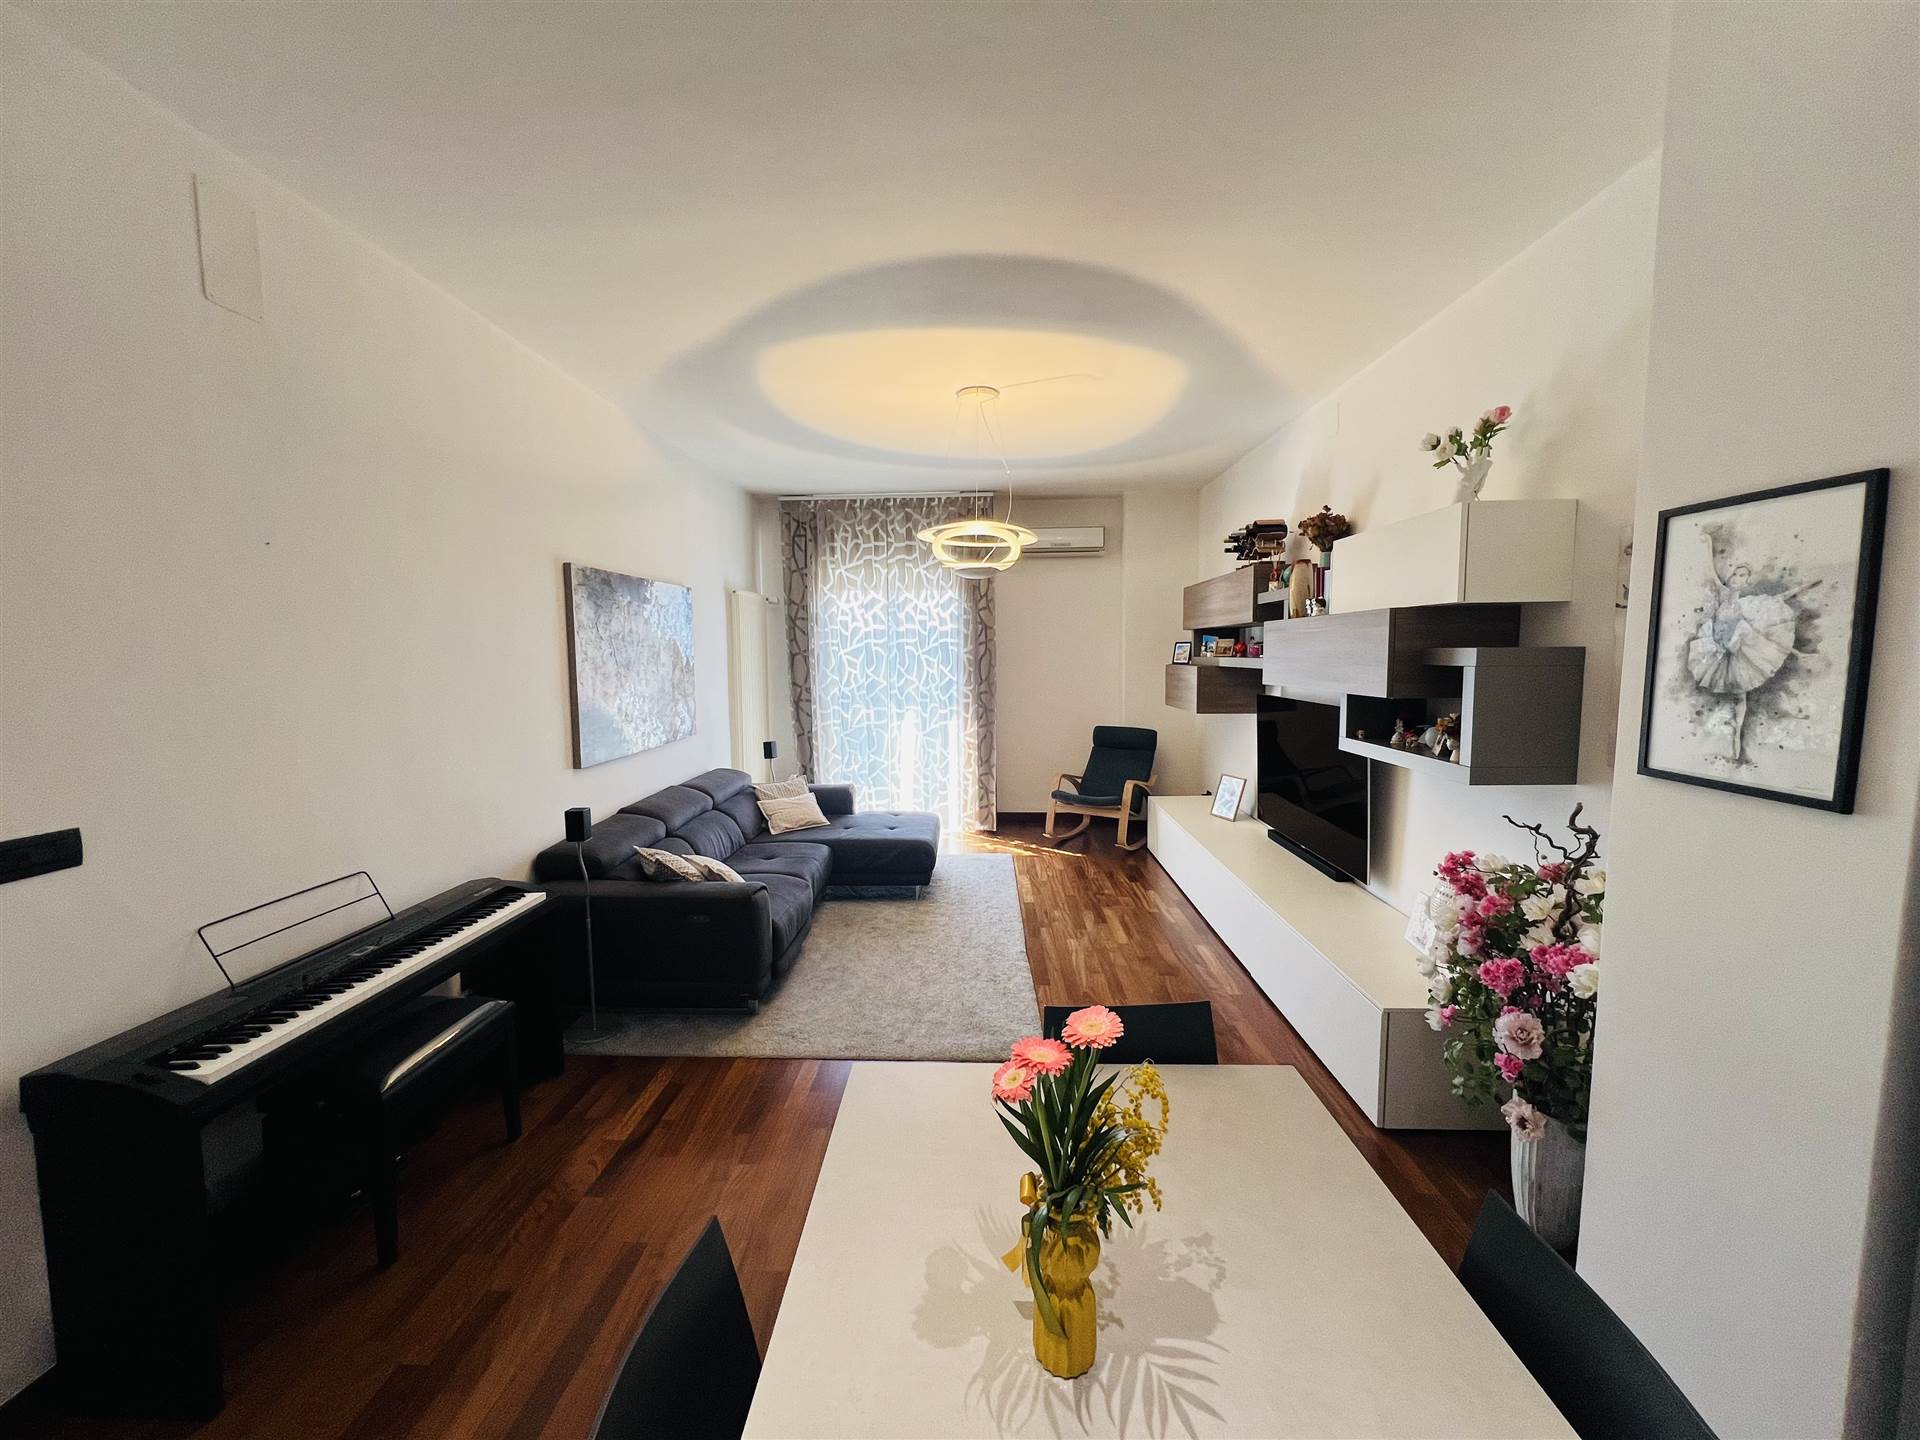 CARRASSI, BARI, Apartment for sale of 96 Sq. mt., Excellent Condition, Heating Individual heating system, Energetic class: G, Epi: 104,96 kwh/m2 year, placed at 5° on 6, composed by: 3 Rooms, 